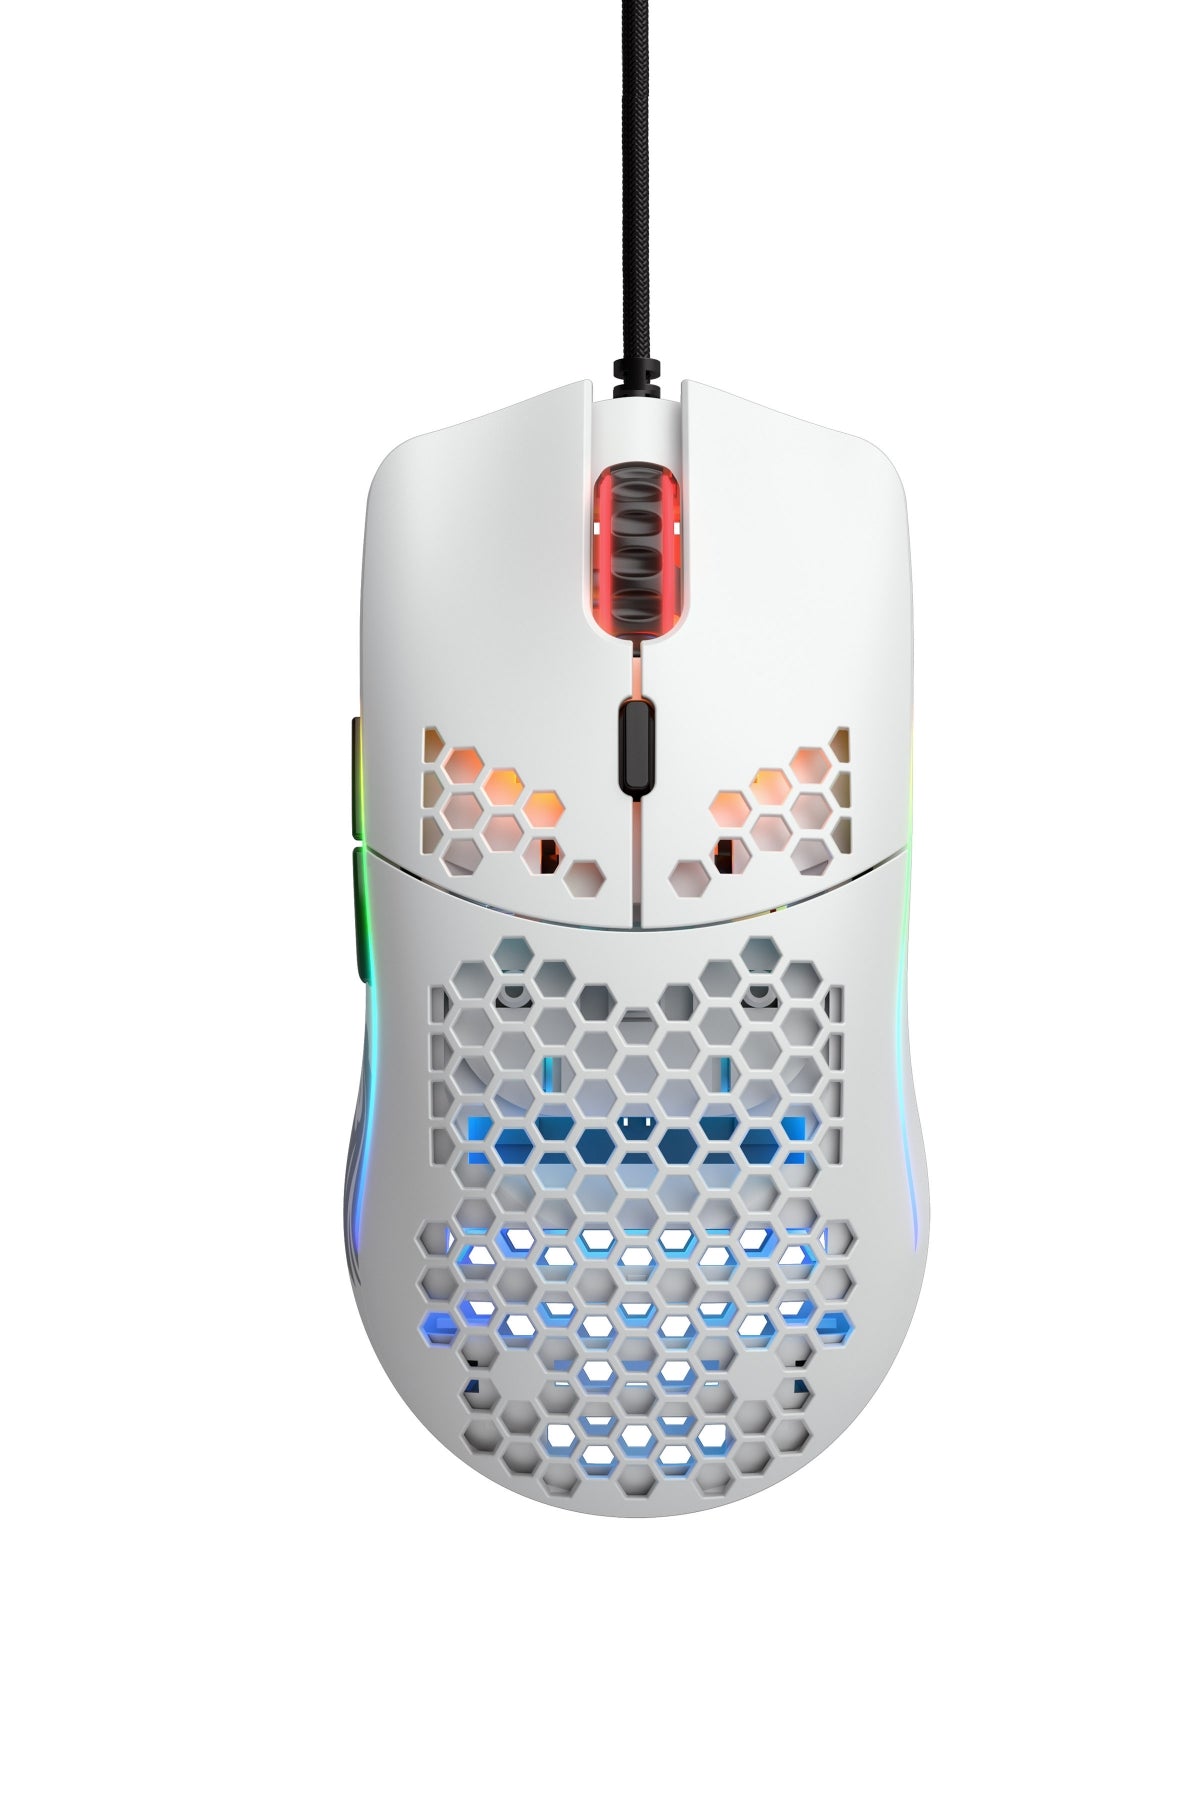 Glorious PC Model O Minus Matte White Lightweight Gaming Mouse MKRL7MAEG5 |0|